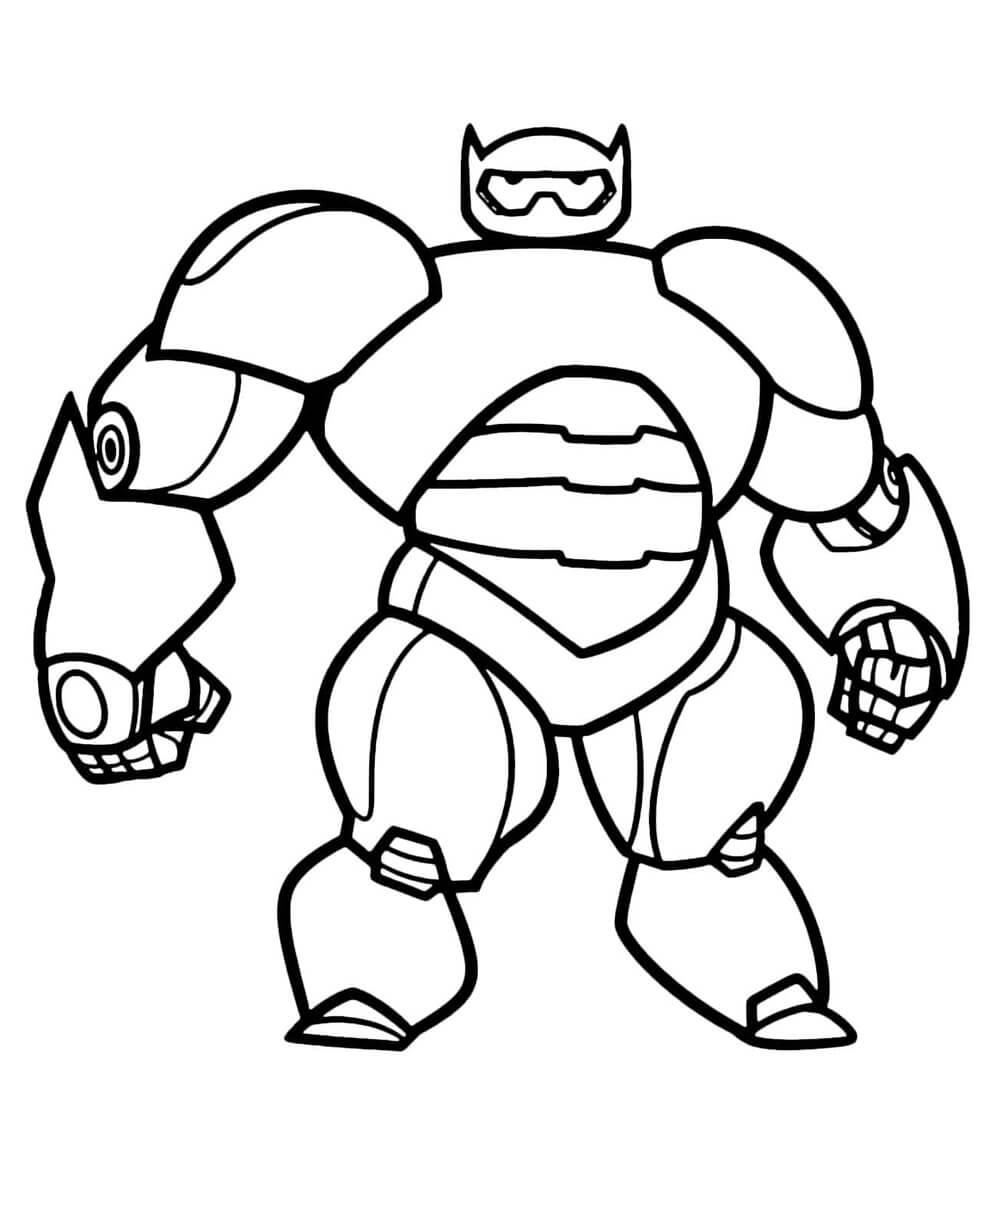 Next Generation Robot Coloring Page - Free Printable Coloring ...